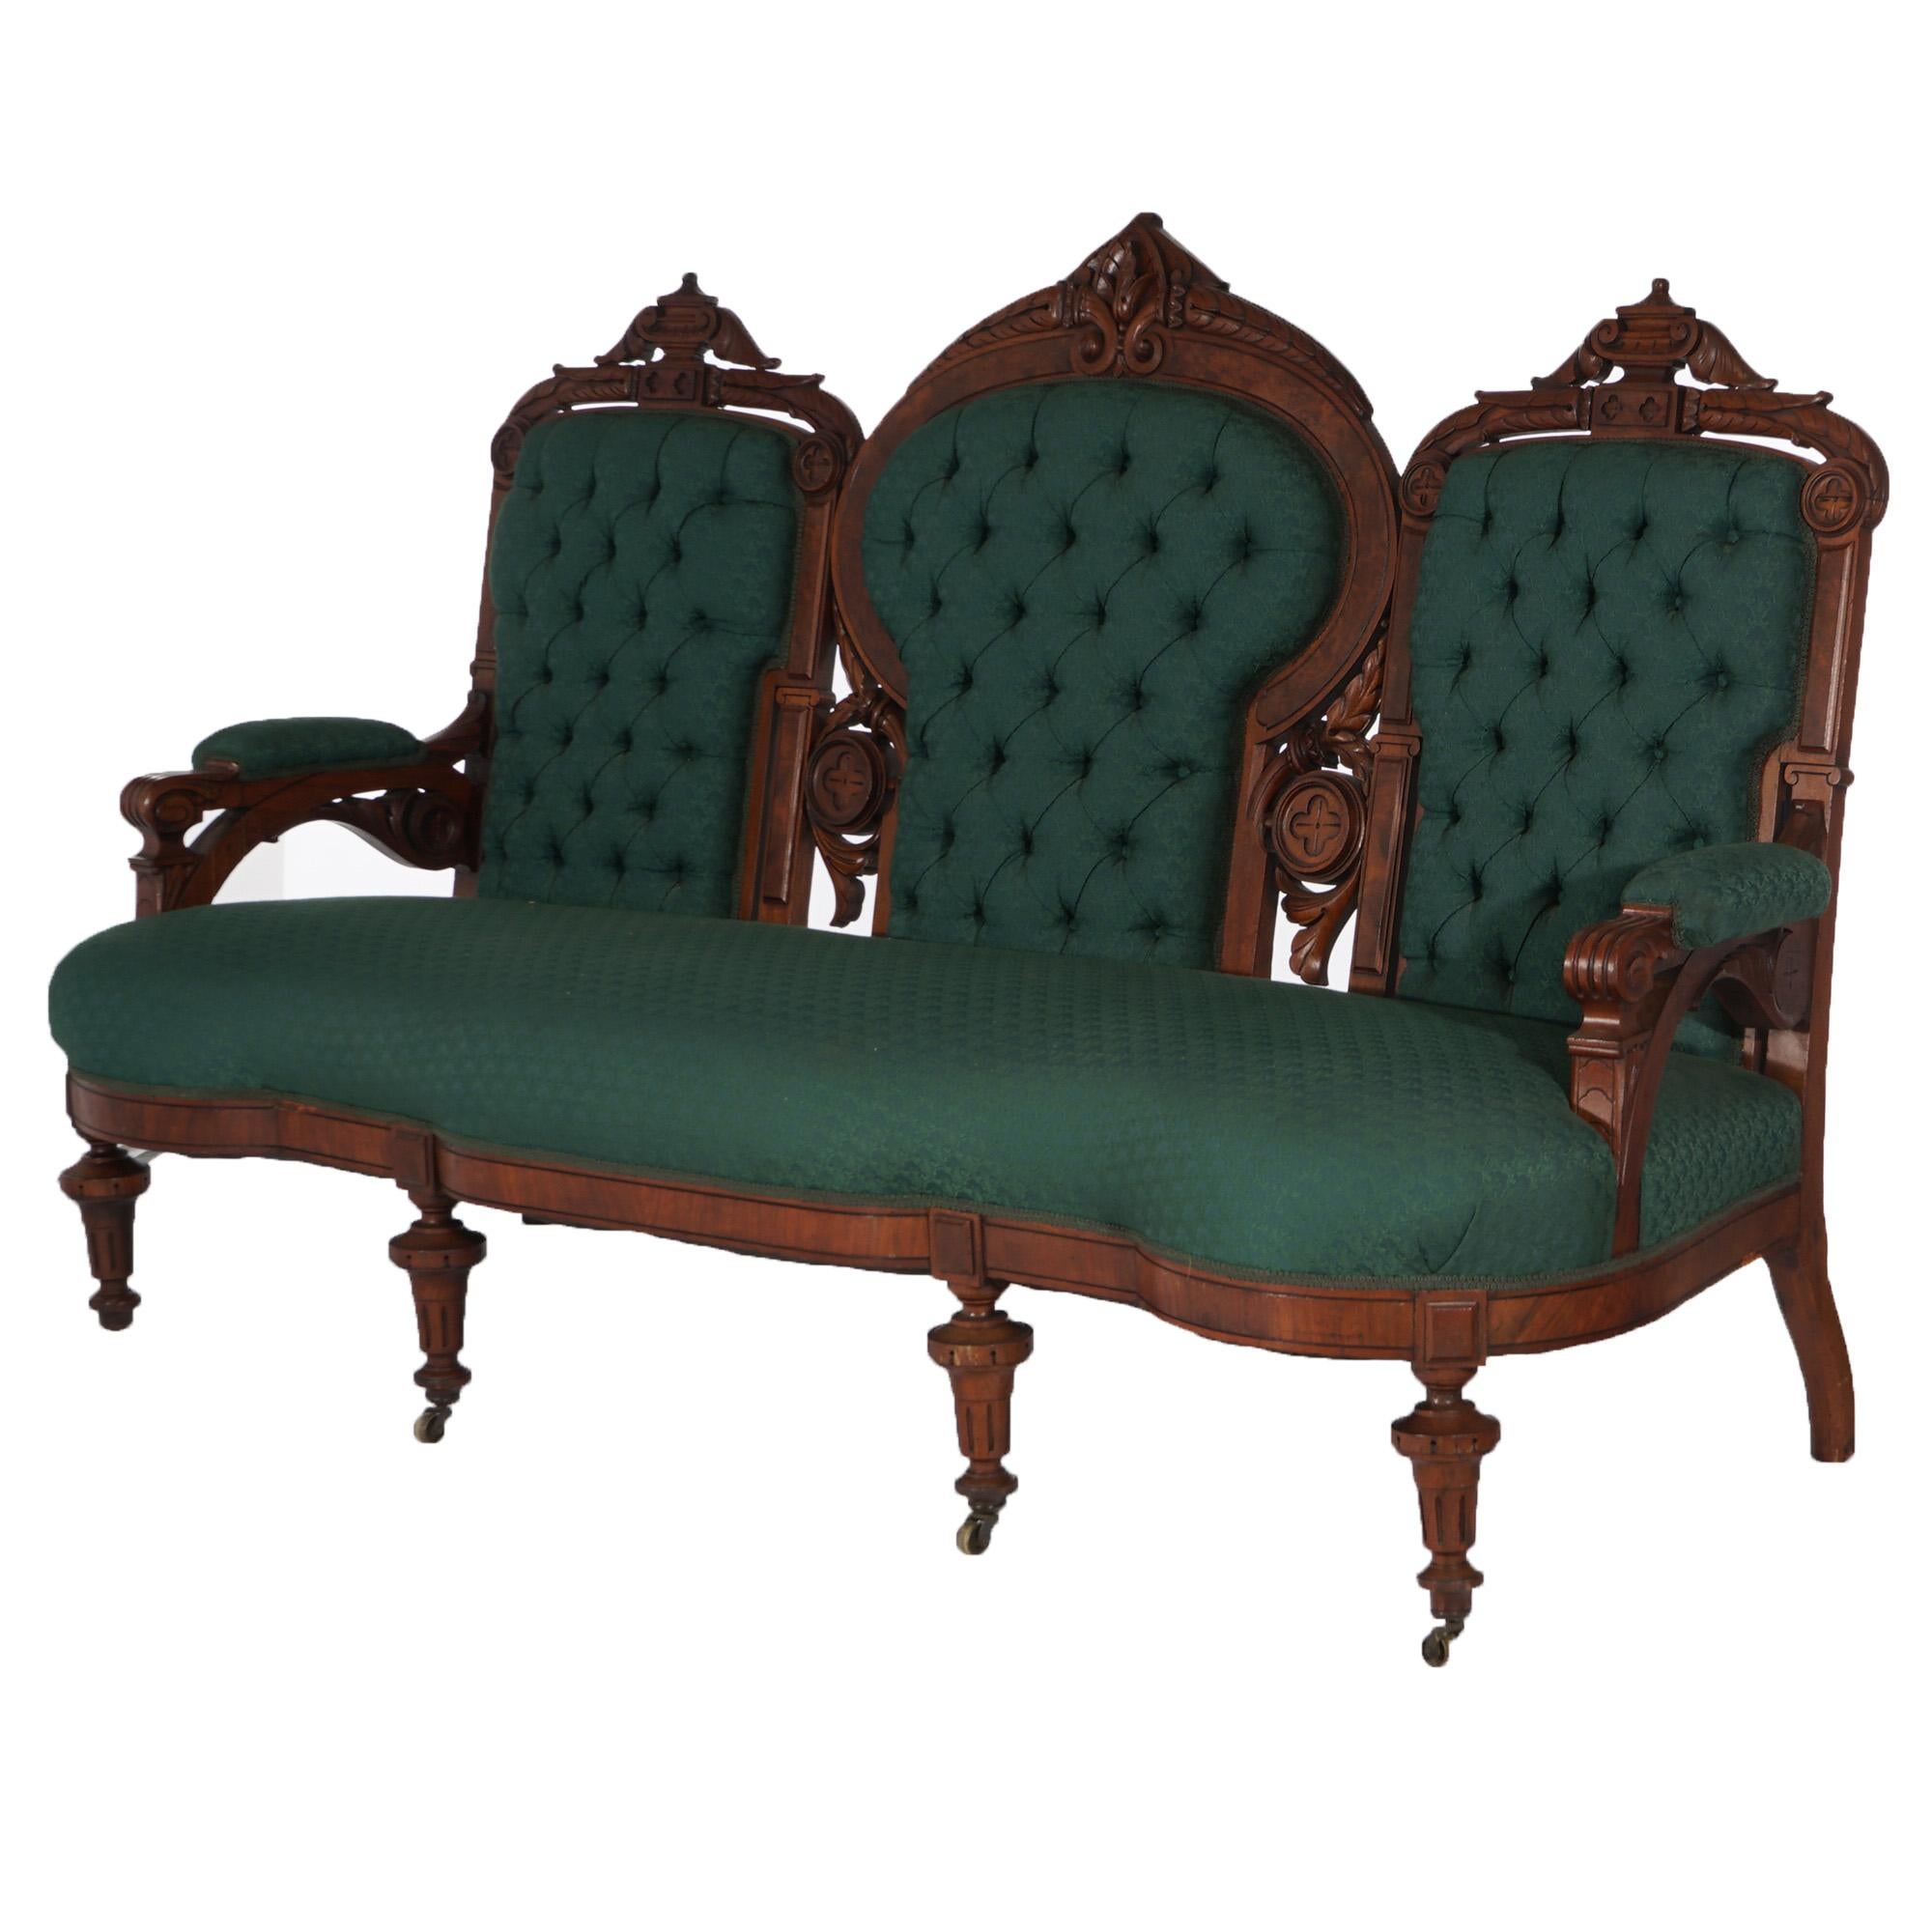 ***Ask About Reduced In-House Delivery Rates - Reliable Professional Service & Fully Insured***
Antique Renaissance Carved Walnut & Burl Upholstered Button-Back Triple Sofa with Carved Crests and Balustrade Legs, C1880

Measures - 44.5